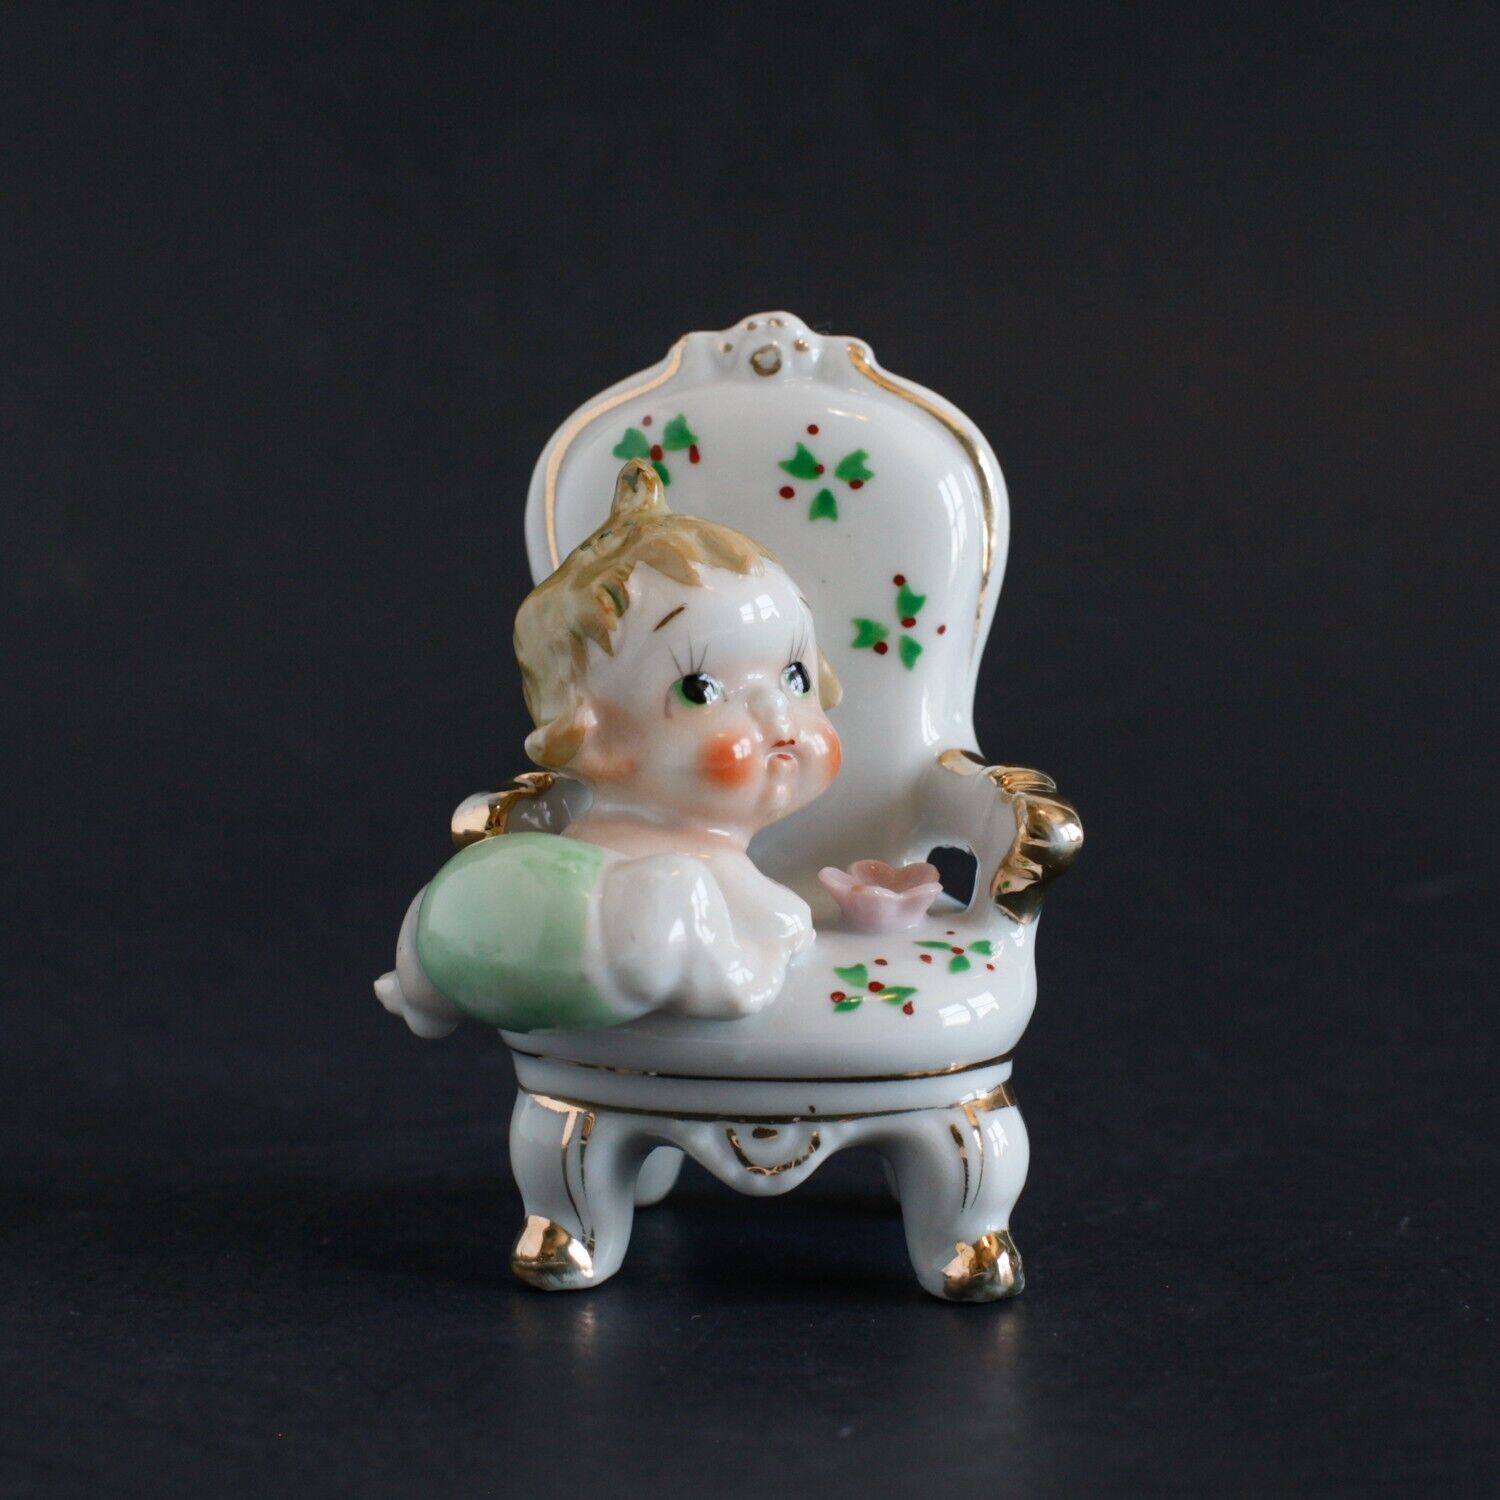 Vintage Baby Climbing on Chair Porcelain Figurine Japan Collectibles